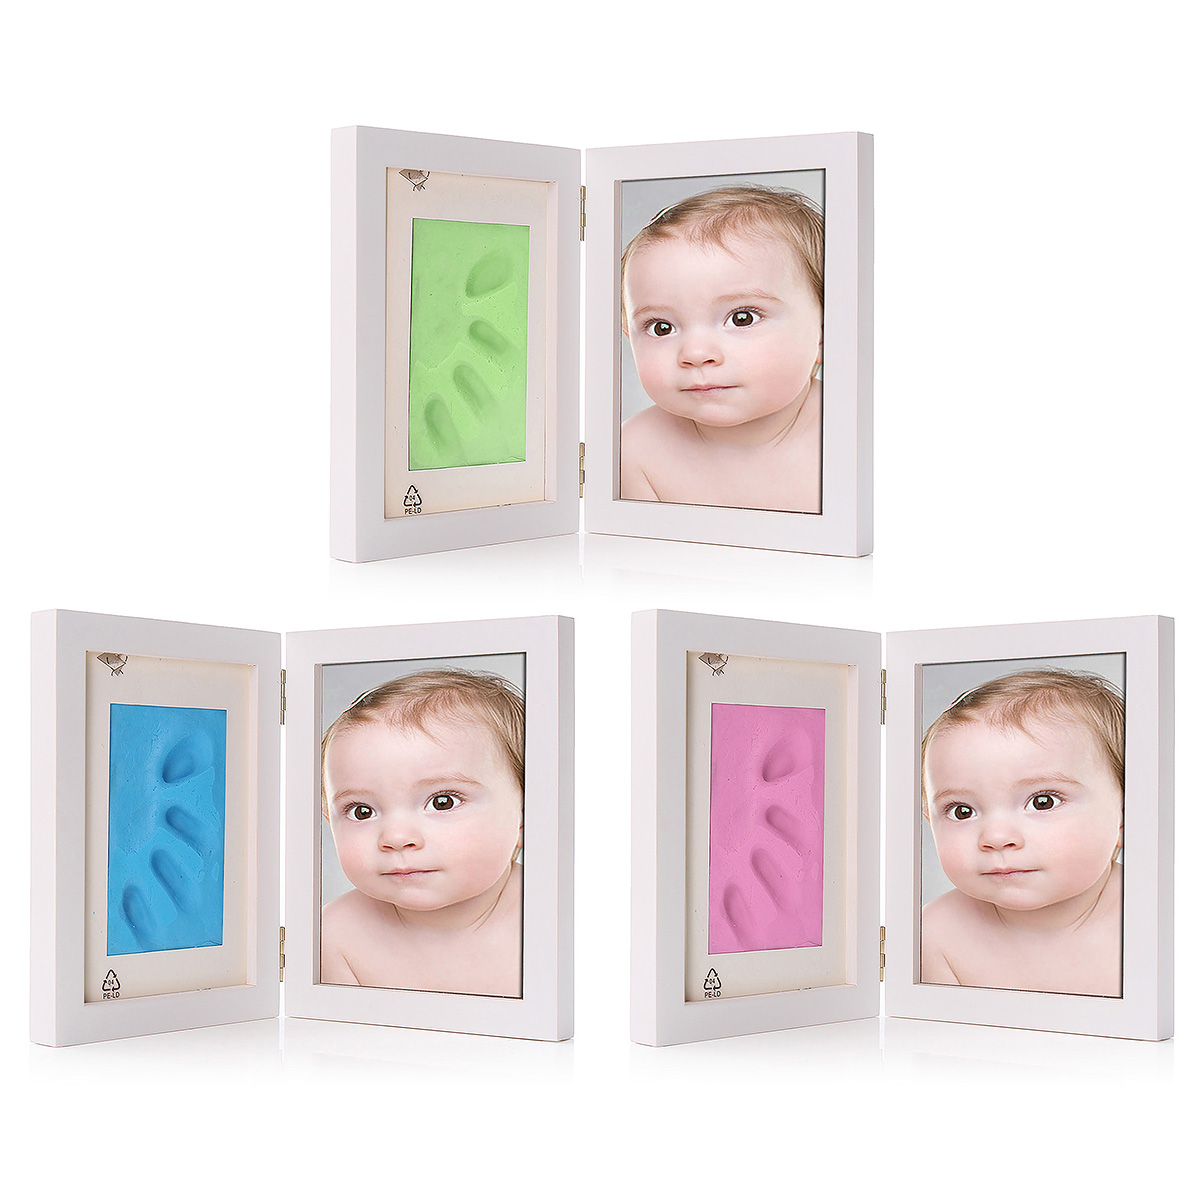 7-Inch-New-Born-Baby-Hnad-Foot-Print-Clay-Wood-Photo-Frame-Stand-Home-Decor-1632990-1